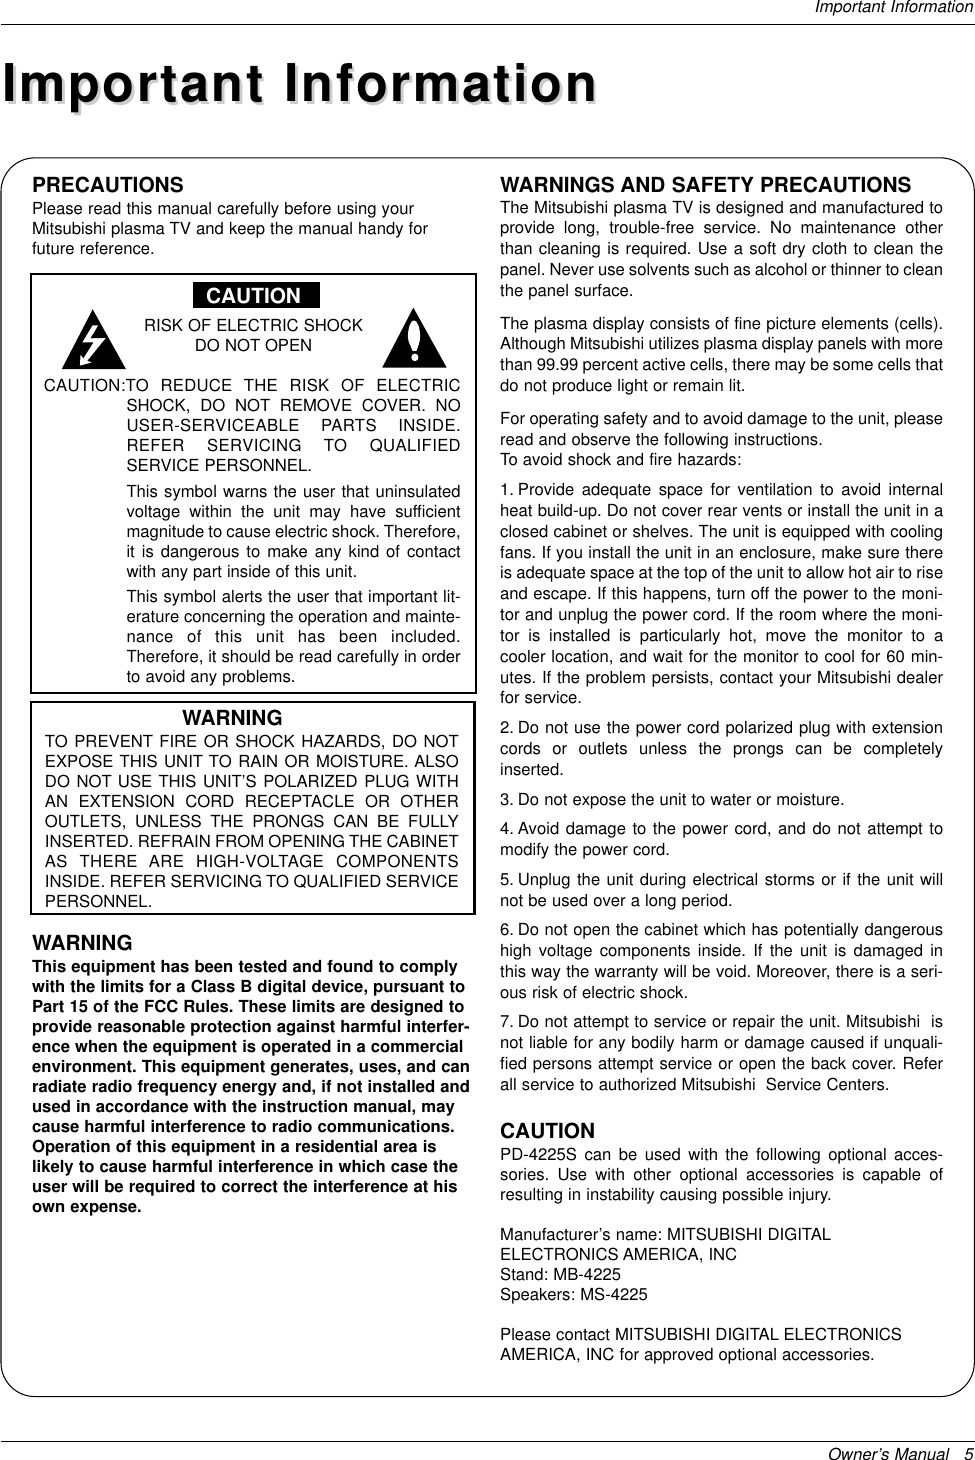 Owner’s Manual   5Important InformationPRECAUTIONSPlease read this manual carefully before using yourMitsubishi plasma TV and keep the manual handy forfuture reference.CAUTIONRISK OF ELECTRIC SHOCKDO NOT OPENCAUTION:TO REDUCE THE RISK OF ELECTRICSHOCK, DO NOT REMOVE COVER. NOUSER-SERVICEABLE PARTS INSIDE. REFER SERVICING TO QUALIFIED SERVICE PERSONNEL.This symbol warns the user that uninsulatedvoltage within the unit may have sufficientmagnitude to cause electric shock. Therefore,it is dangerous to make any kind of contactwith any part inside of this unit.This symbol alerts the user that important lit-erature concerning the operation and mainte-nance of this unit has been included.Therefore, it should be read carefully in orderto avoid any problems.WARNINGTO PREVENT FIRE OR SHOCK HAZARDS, DO NOTEXPOSE THIS UNIT TO RAIN OR MOISTURE. ALSODO NOT USE THIS UNIT’S POLARIZED PLUG WITHAN EXTENSION CORD RECEPTACLE OR OTHEROUTLETS, UNLESS THE PRONGS CAN BE FULLYINSERTED. REFRAIN FROM OPENING THE CABINETAS THERE ARE HIGH-VOLTAGE COMPONENTSINSIDE. REFER SERVICING TO QUALIFIED SERVICEPERSONNEL.WARNINGThis equipment has been tested and found to complywith the limits for a Class B digital device, pursuant toPart 15 of the FCC Rules. These limits are designed toprovide reasonable protection against harmful interfer-ence when the equipment is operated in a commercialenvironment. This equipment generates, uses, and canradiate radio frequency energy and, if not installed andused in accordance with the instruction manual, maycause harmful interference to radio communications.Operation of this equipment in a residential area islikely to cause harmful interference in which case theuser will be required to correct the interference at hisown expense.WARNINGS AND SAFETY PRECAUTIONSThe Mitsubishi plasma TV is designed and manufactured toprovide long, trouble-free service. No maintenance otherthan cleaning is required. Use a soft dry cloth to clean thepanel. Never use solvents such as alcohol or thinner to cleanthe panel surface. The plasma display consists of fine picture elements (cells).Although Mitsubishi utilizes plasma display panels with morethan 99.99 percent active cells, there may be some cells thatdo not produce light or remain lit.For operating safety and to avoid damage to the unit, pleaseread and observe the following instructions. To avoid shock and fire hazards:1. Provide adequate space for ventilation to avoid internalheat build-up. Do not cover rear vents or install the unit in aclosed cabinet or shelves. The unit is equipped with coolingfans. If you install the unit in an enclosure, make sure thereis adequate space at the top of the unit to allow hot air to riseand escape. If this happens, turn off the power to the moni-tor and unplug the power cord. If the room where the moni-tor is installed is particularly hot, move the monitor to acooler location, and wait for the monitor to cool for 60 min-utes. If the problem persists, contact your Mitsubishi dealerfor service.2. Do not use the power cord polarized plug with extensioncords or outlets unless the prongs can be completelyinserted.3. Do not expose the unit to water or moisture.4. Avoid damage to the power cord, and do not attempt tomodify the power cord.5. Unplug the unit during electrical storms or if the unit willnot be used over a long period.6. Do not open the cabinet which has potentially dangeroushigh voltage components inside. If the unit is damaged inthis way the warranty will be void. Moreover, there is a seri-ous risk of electric shock.7. Do not attempt to service or repair the unit. Mitsubishi  isnot liable for any bodily harm or damage caused if unquali-fied persons attempt service or open the back cover. Referall service to authorized Mitsubishi  Service Centers.CAUTIONPD-4225S can be used with the following optional acces-sories. Use with other optional accessories is capable ofresulting in instability causing possible injury.Manufacturer’s name: MITSUBISHI DIGITALELECTRONICS AMERICA, INCStand: MB-4225Speakers: MS-4225Please contact MITSUBISHI DIGITAL ELECTRONICSAMERICA, INC for approved optional accessories.Important InformationImportant Information